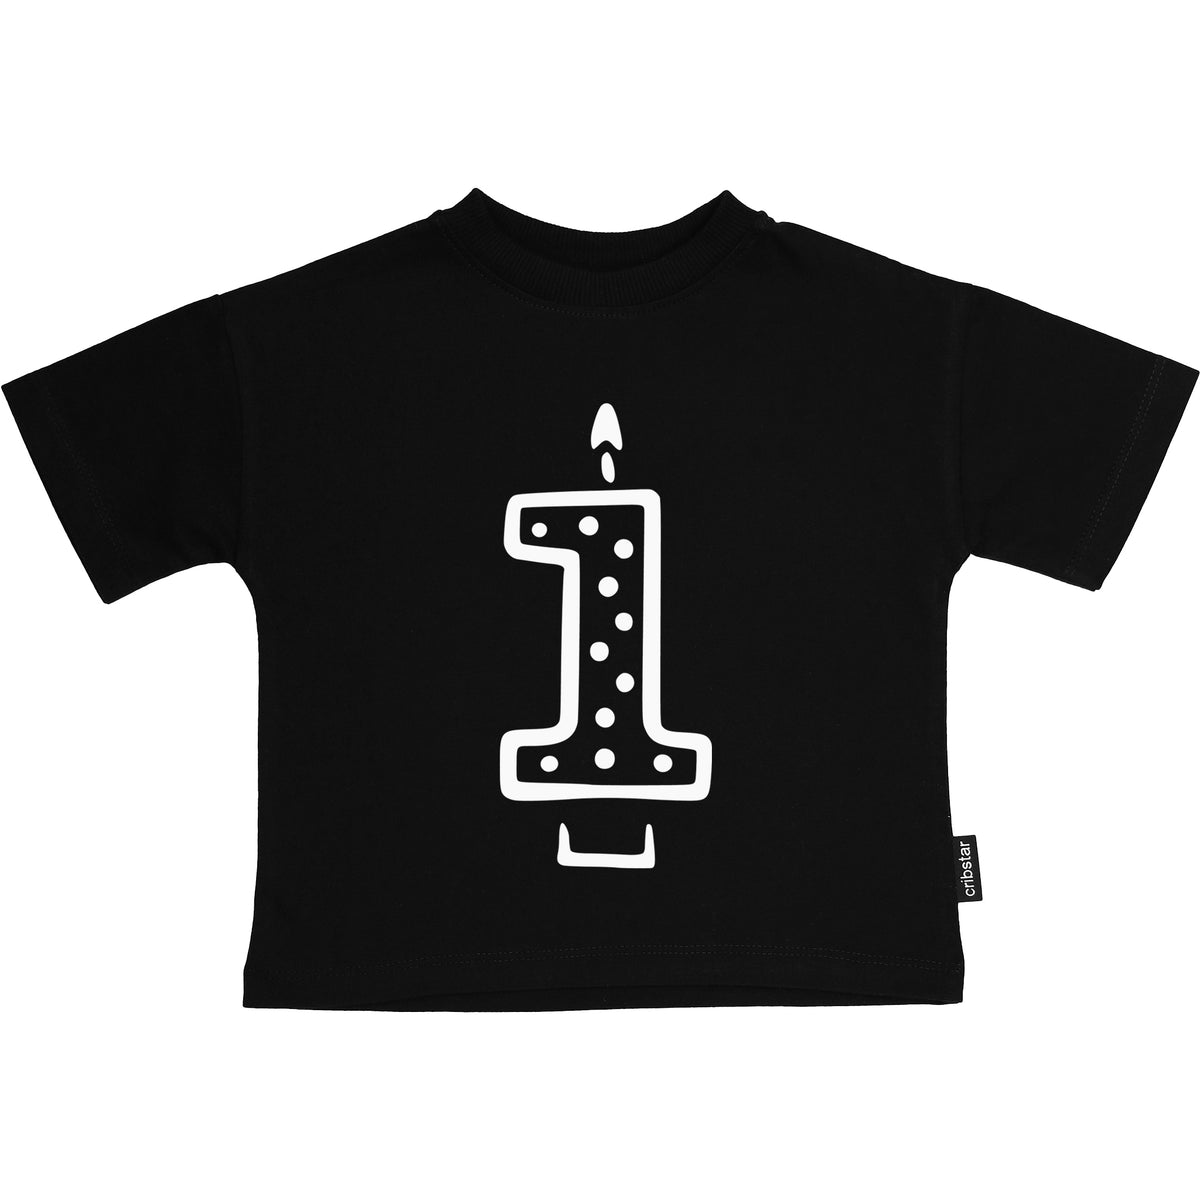 1st Birthday Candle T-Shirt